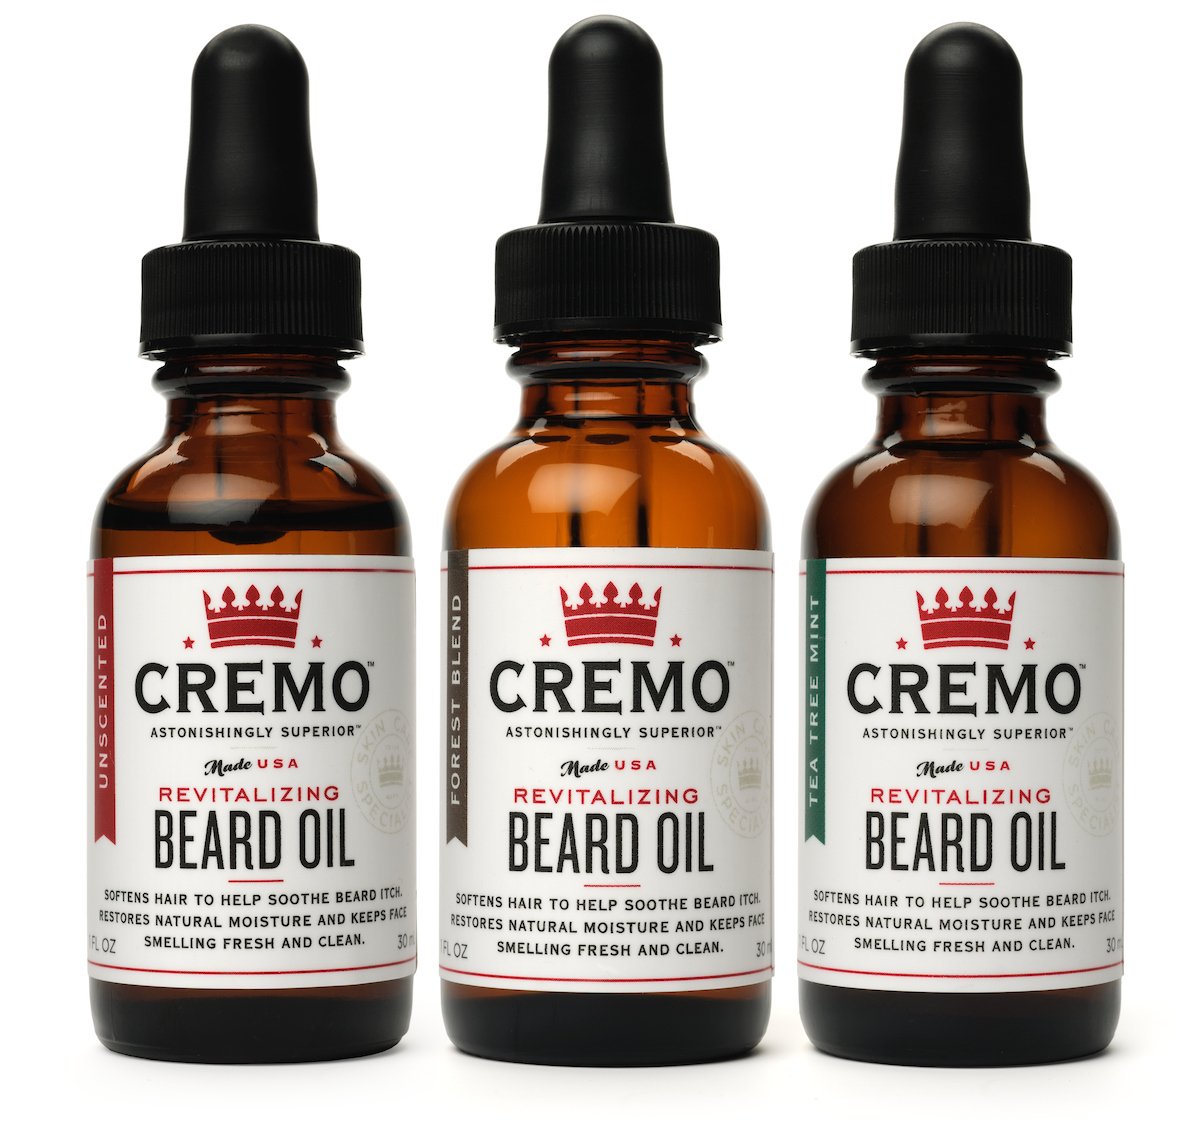 Cremo Beard Oil, Revitalizing Wild Mint, 1 fl oz - Restore Natural Moisture and Soften Your Beard To Help Relieve Beard Itch : Beauty & Personal Care